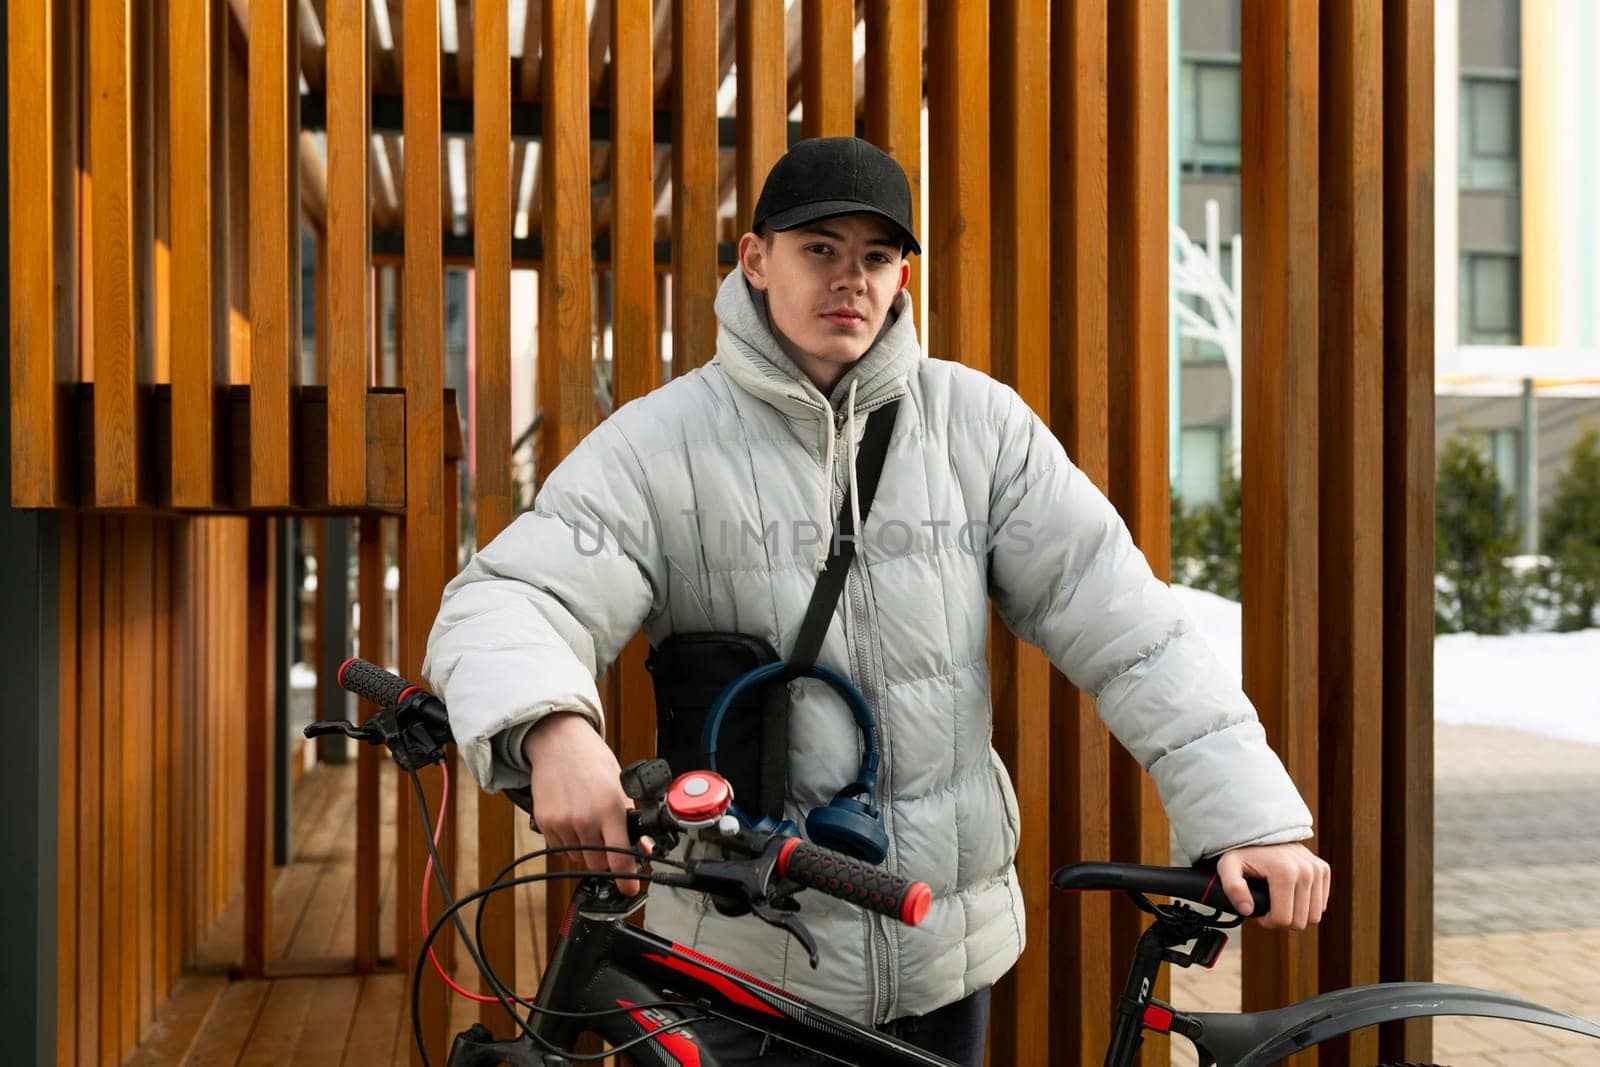 A young Caucasian man with a gray jacket and black cap rented a bicycle by TRMK